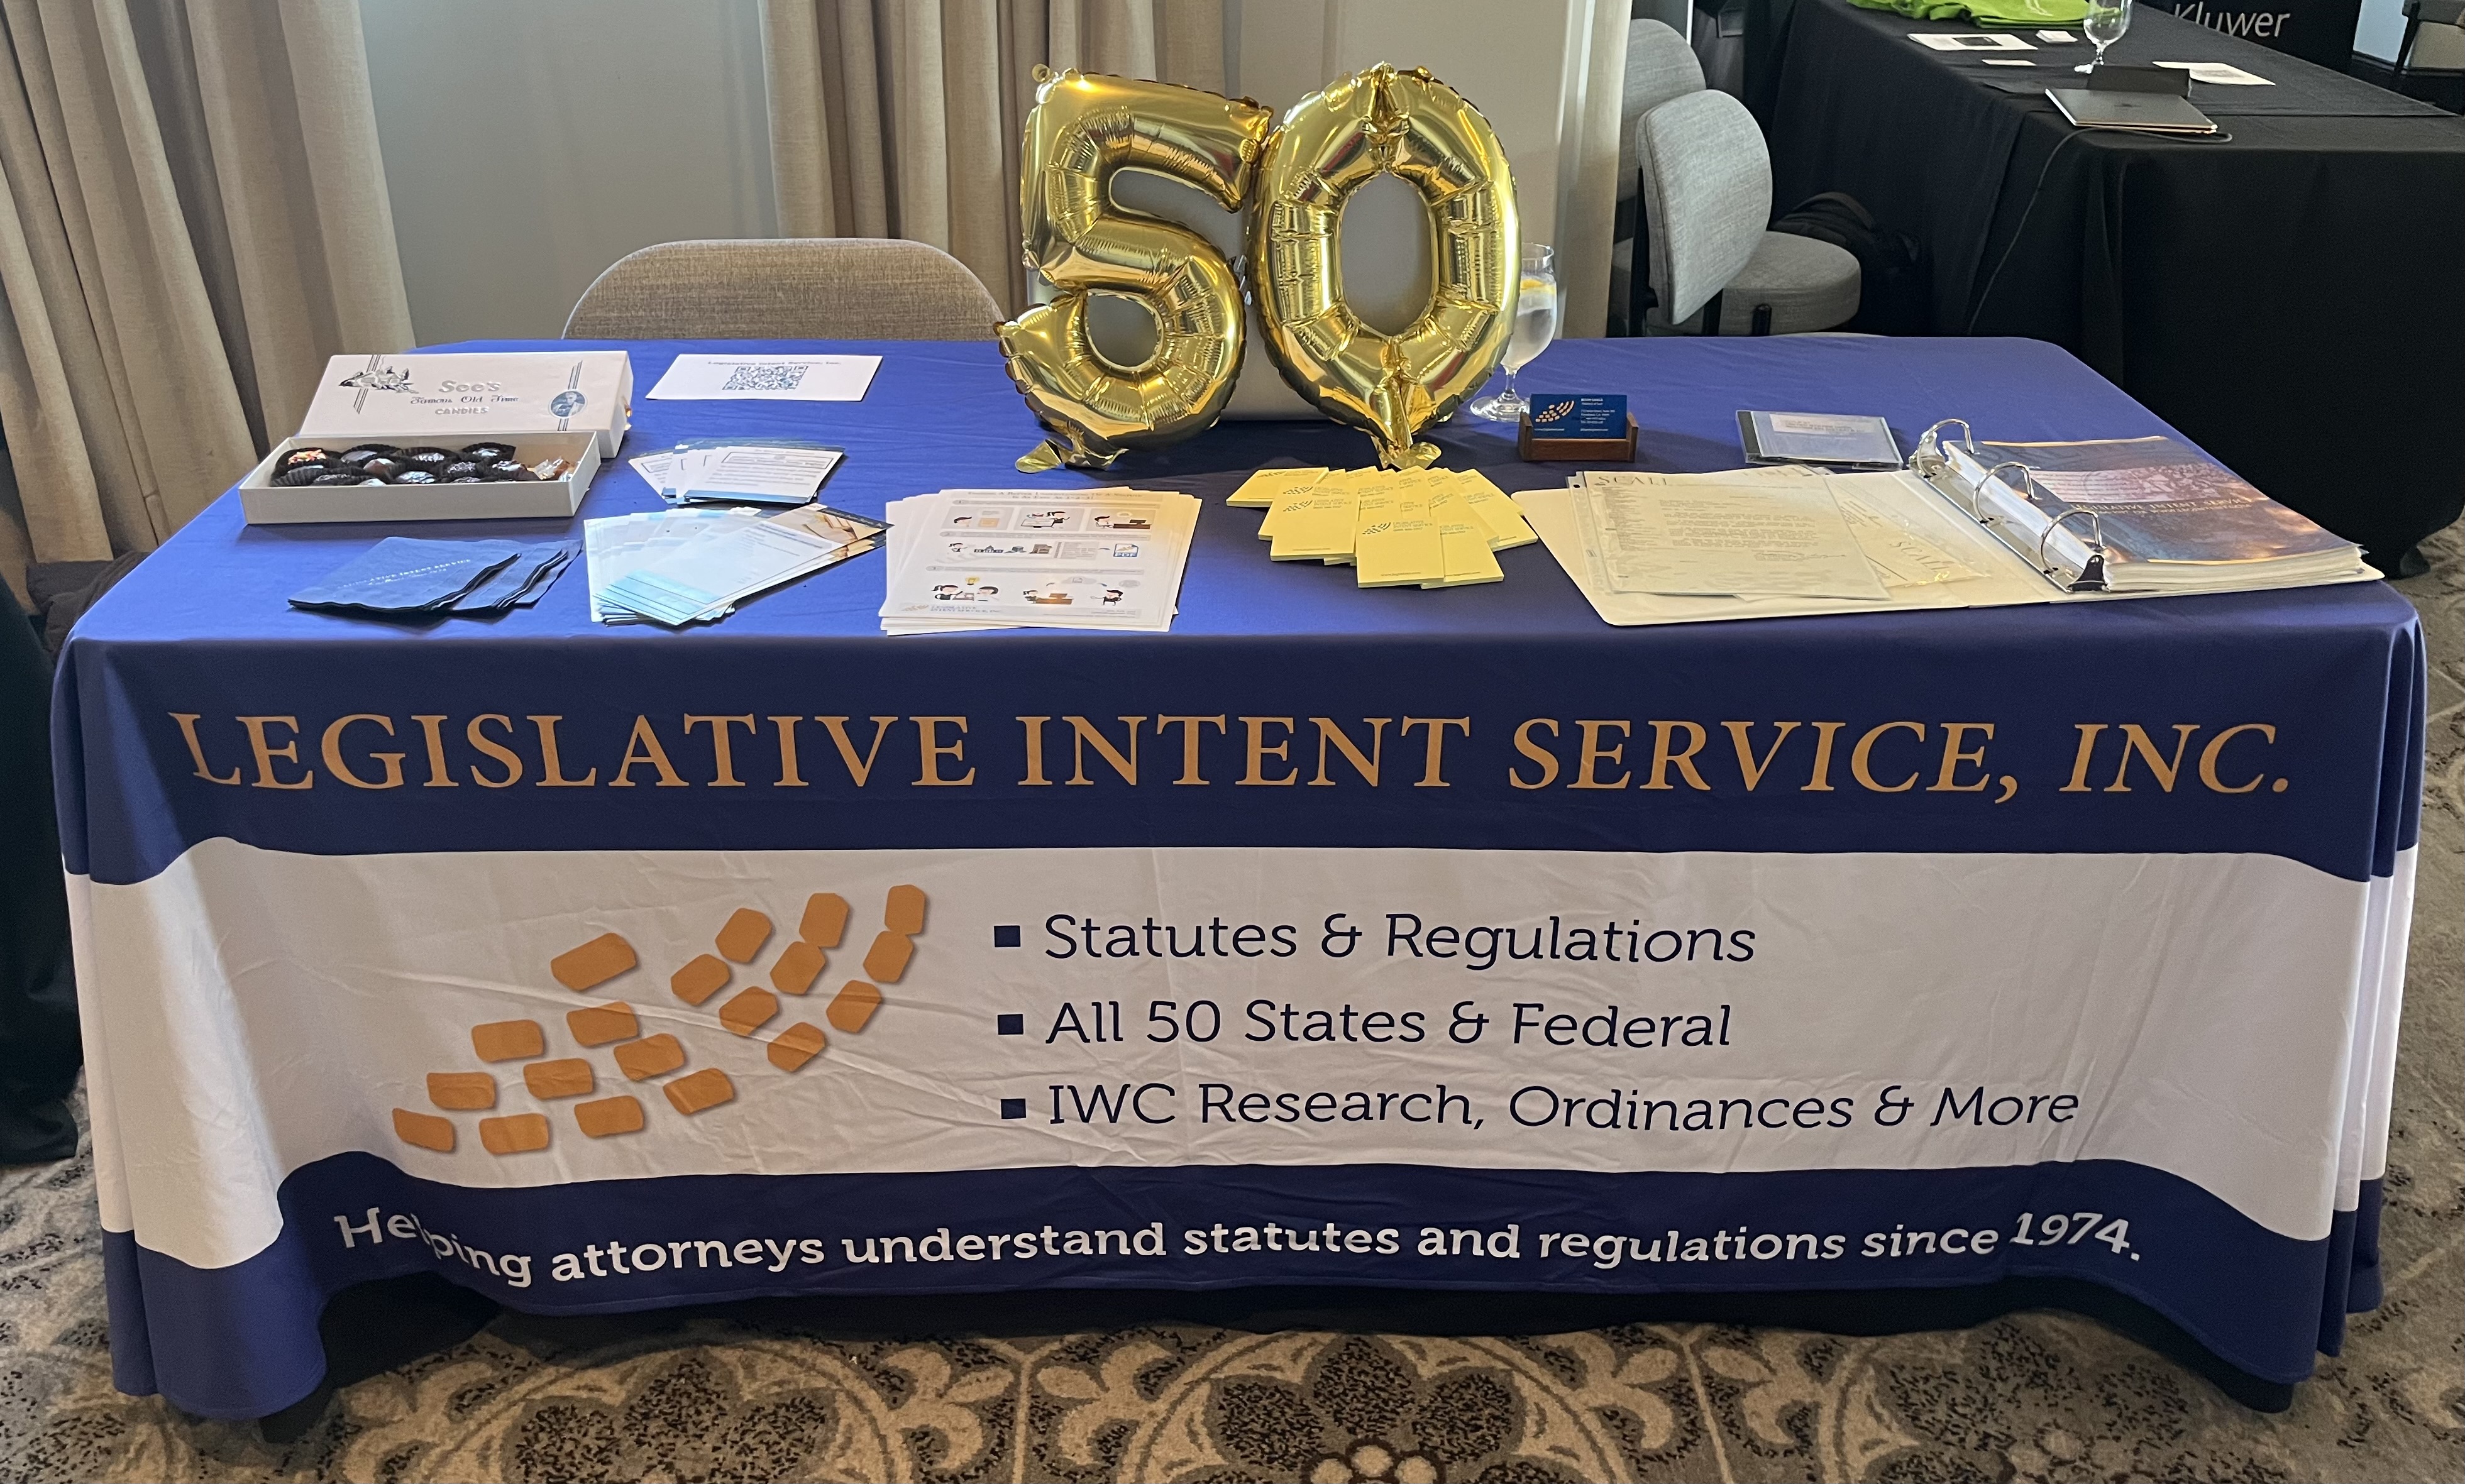 Our Display Table at the SCALL Spring Institute